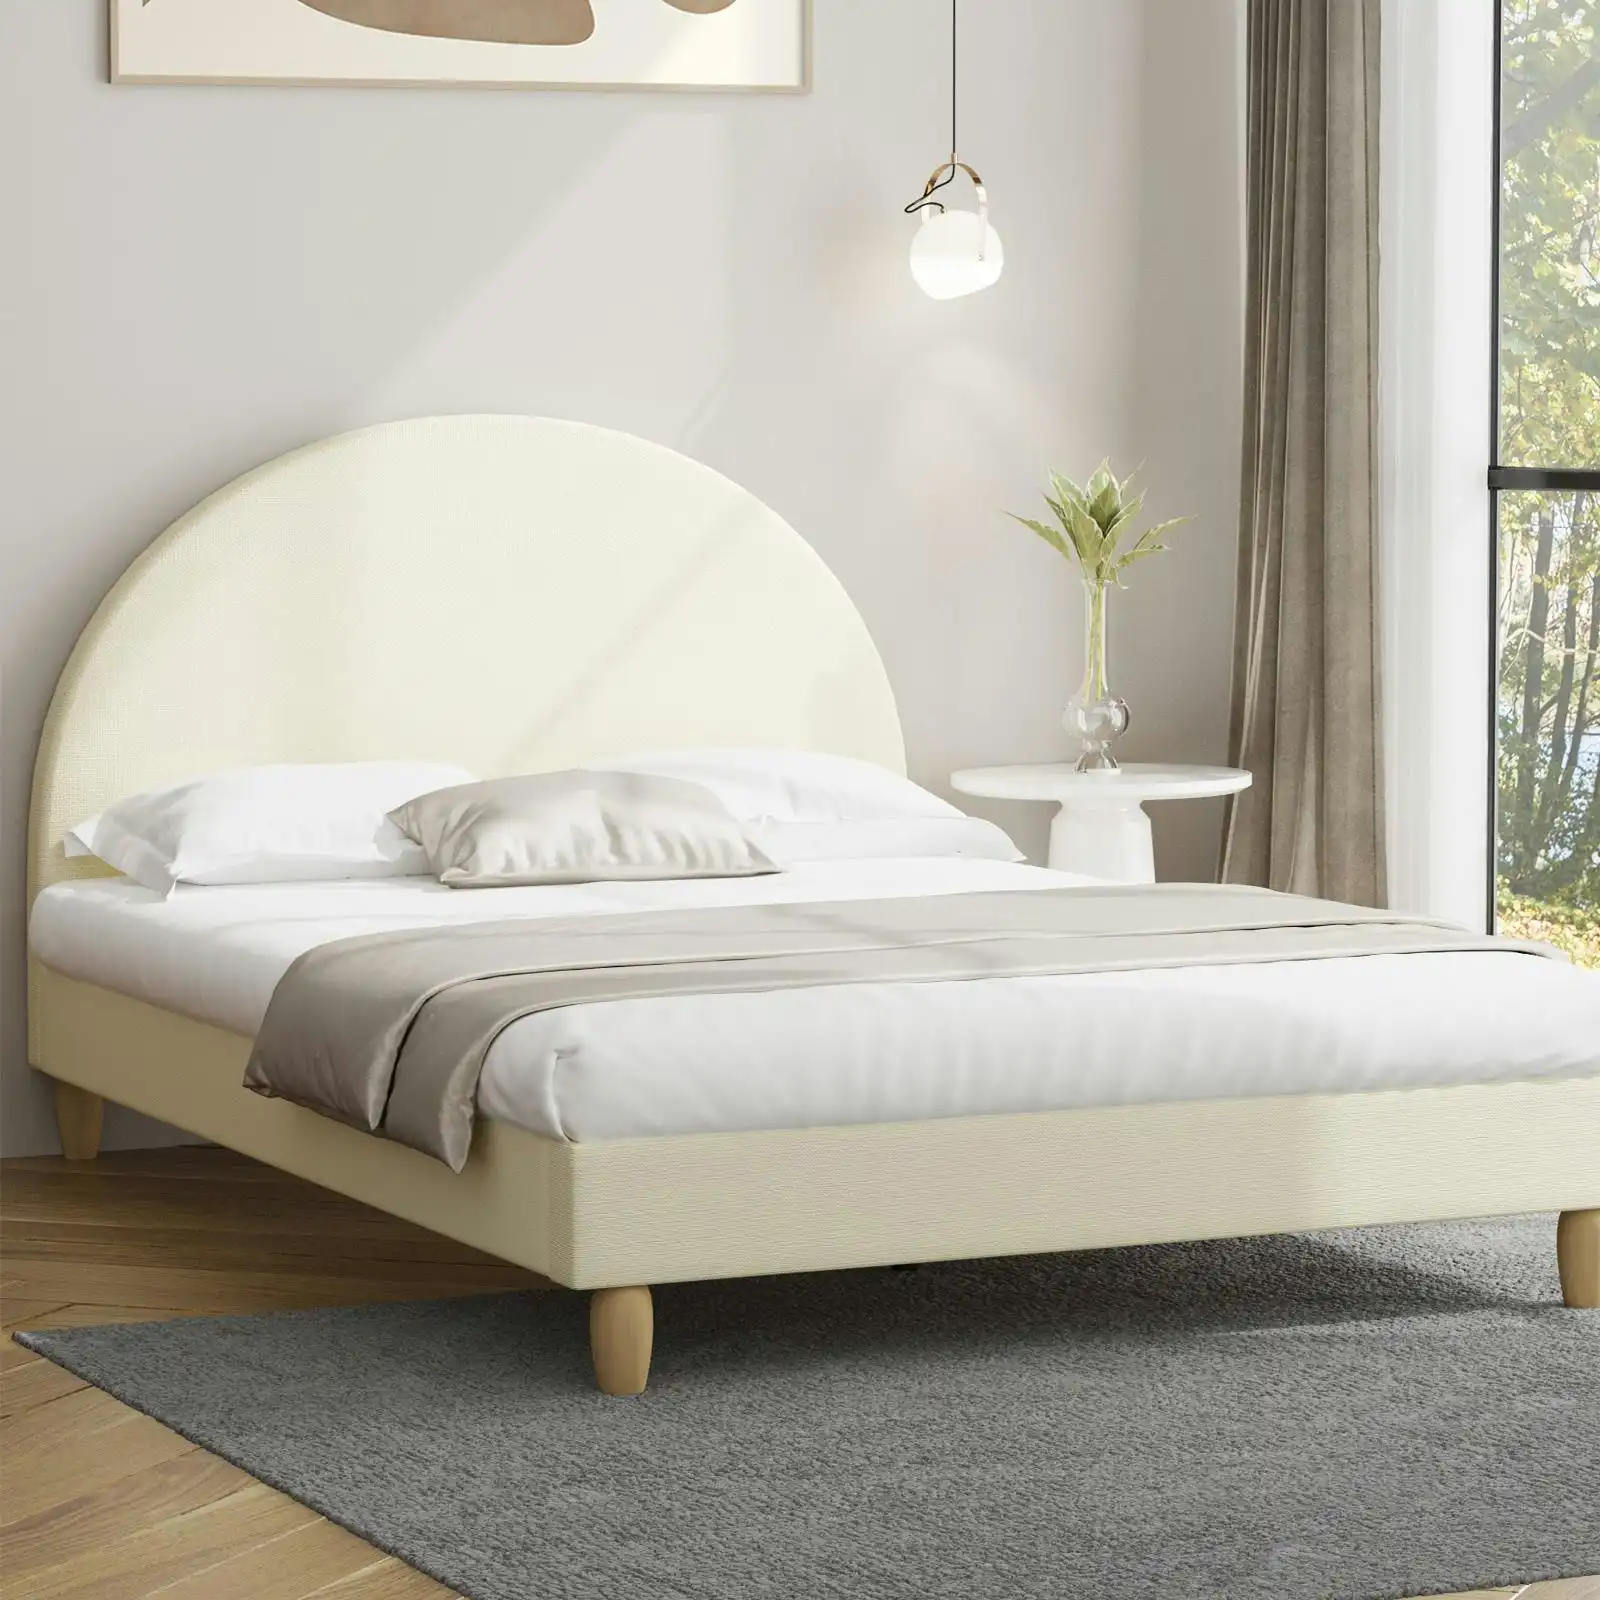 Oikiture Bed Frame Double Size Beige Fabric Arched Beds Platform